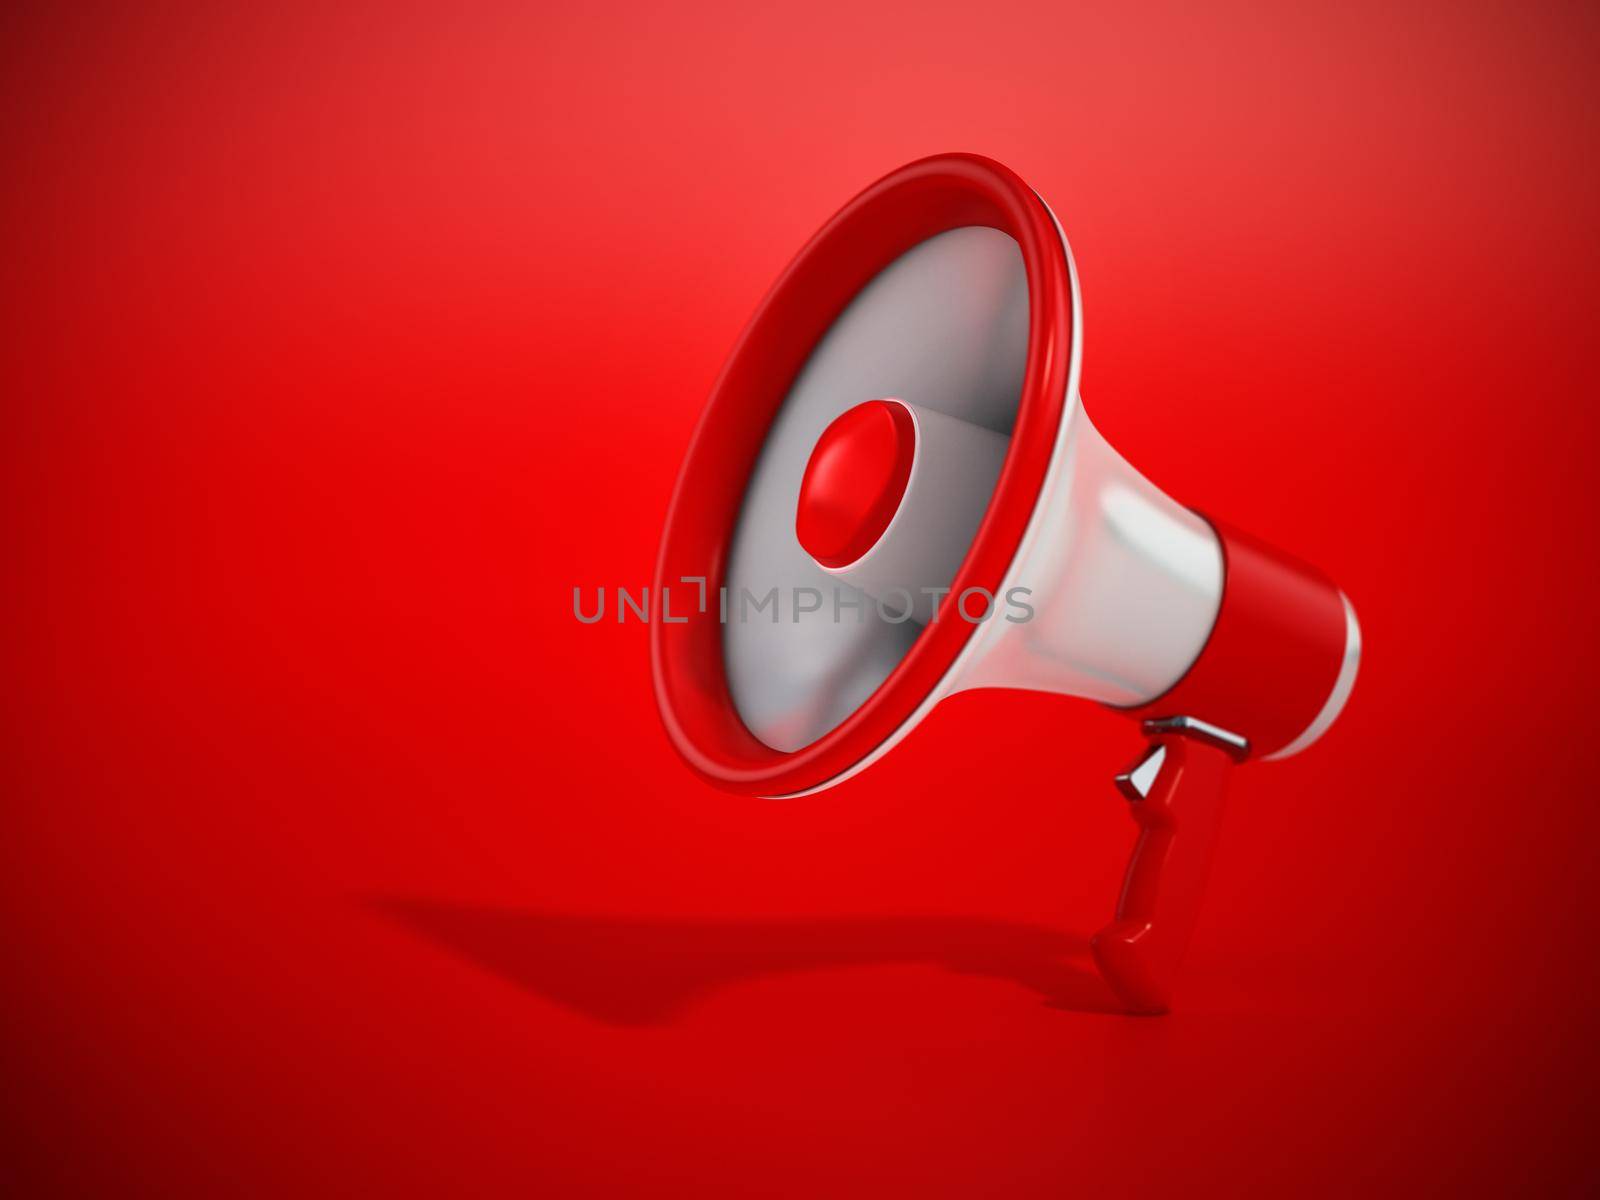 Megaphone standing on red background. 3D illustration by Simsek